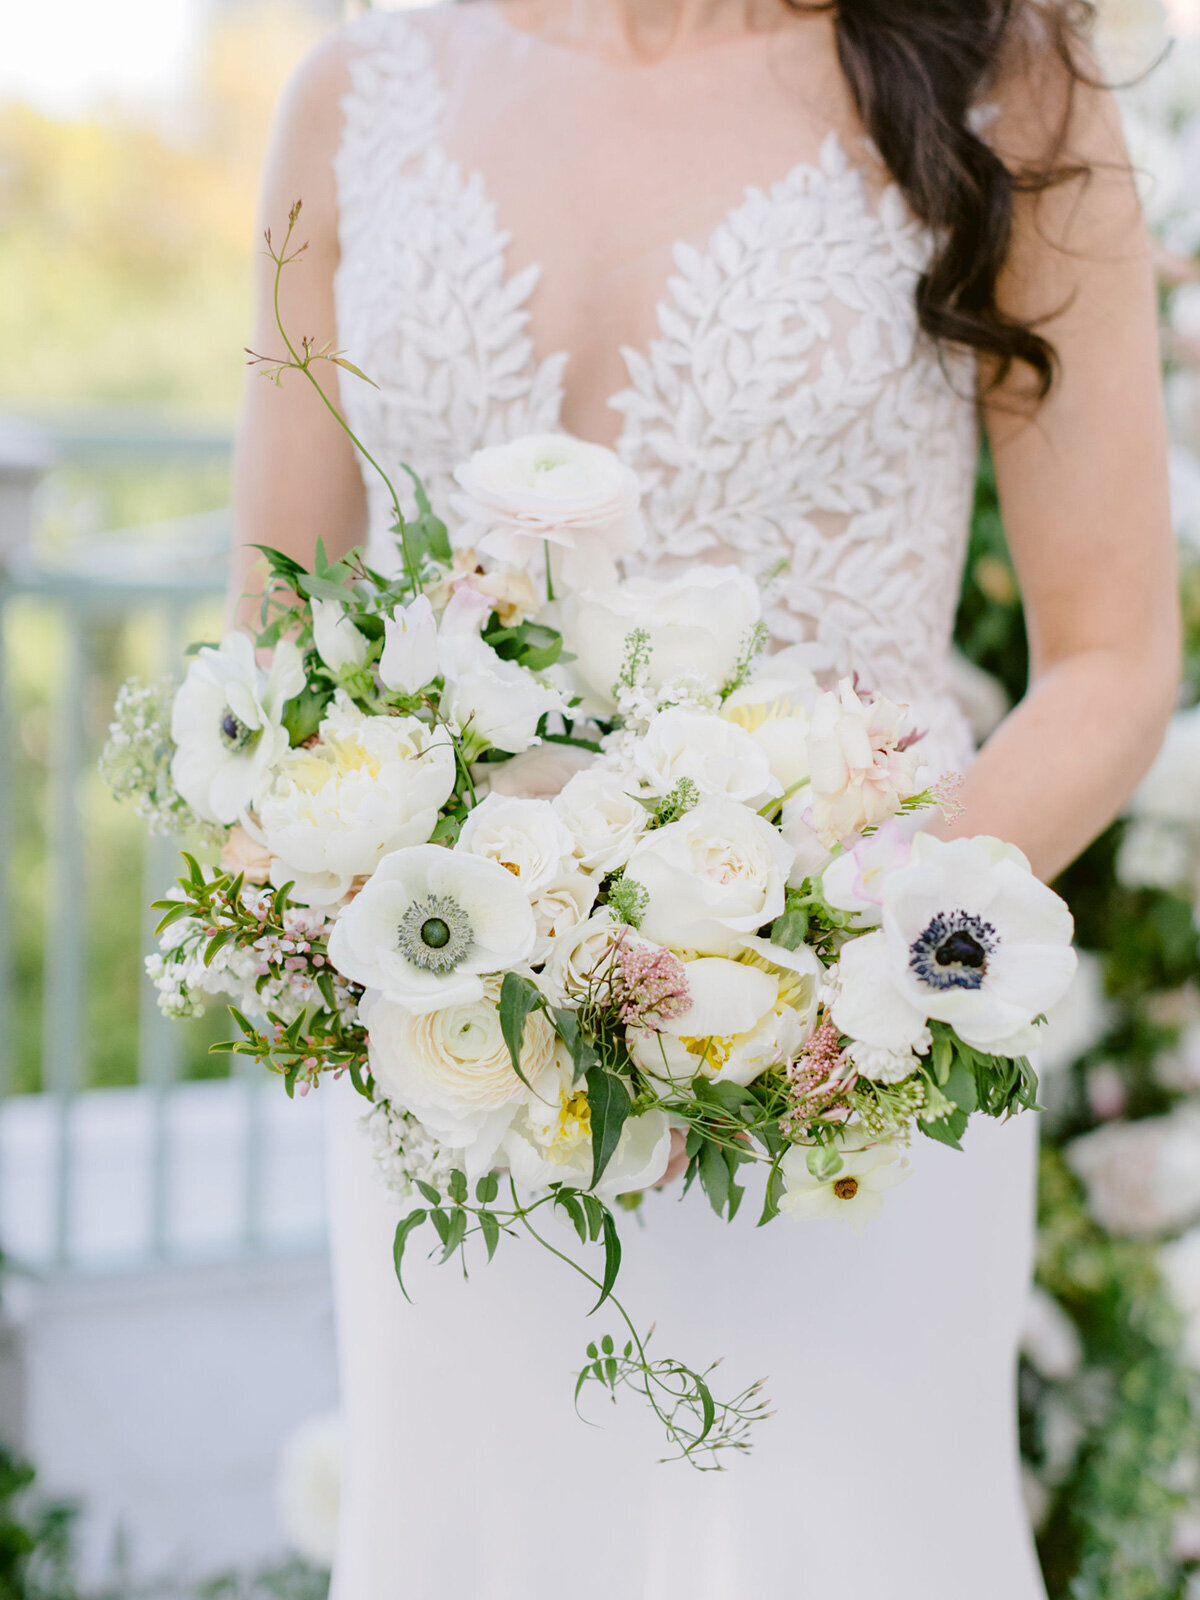 Charleston Elopement Planning | Intimate and Romantic Elopements with Styled Elopements ™ by Pure Luxe Bride